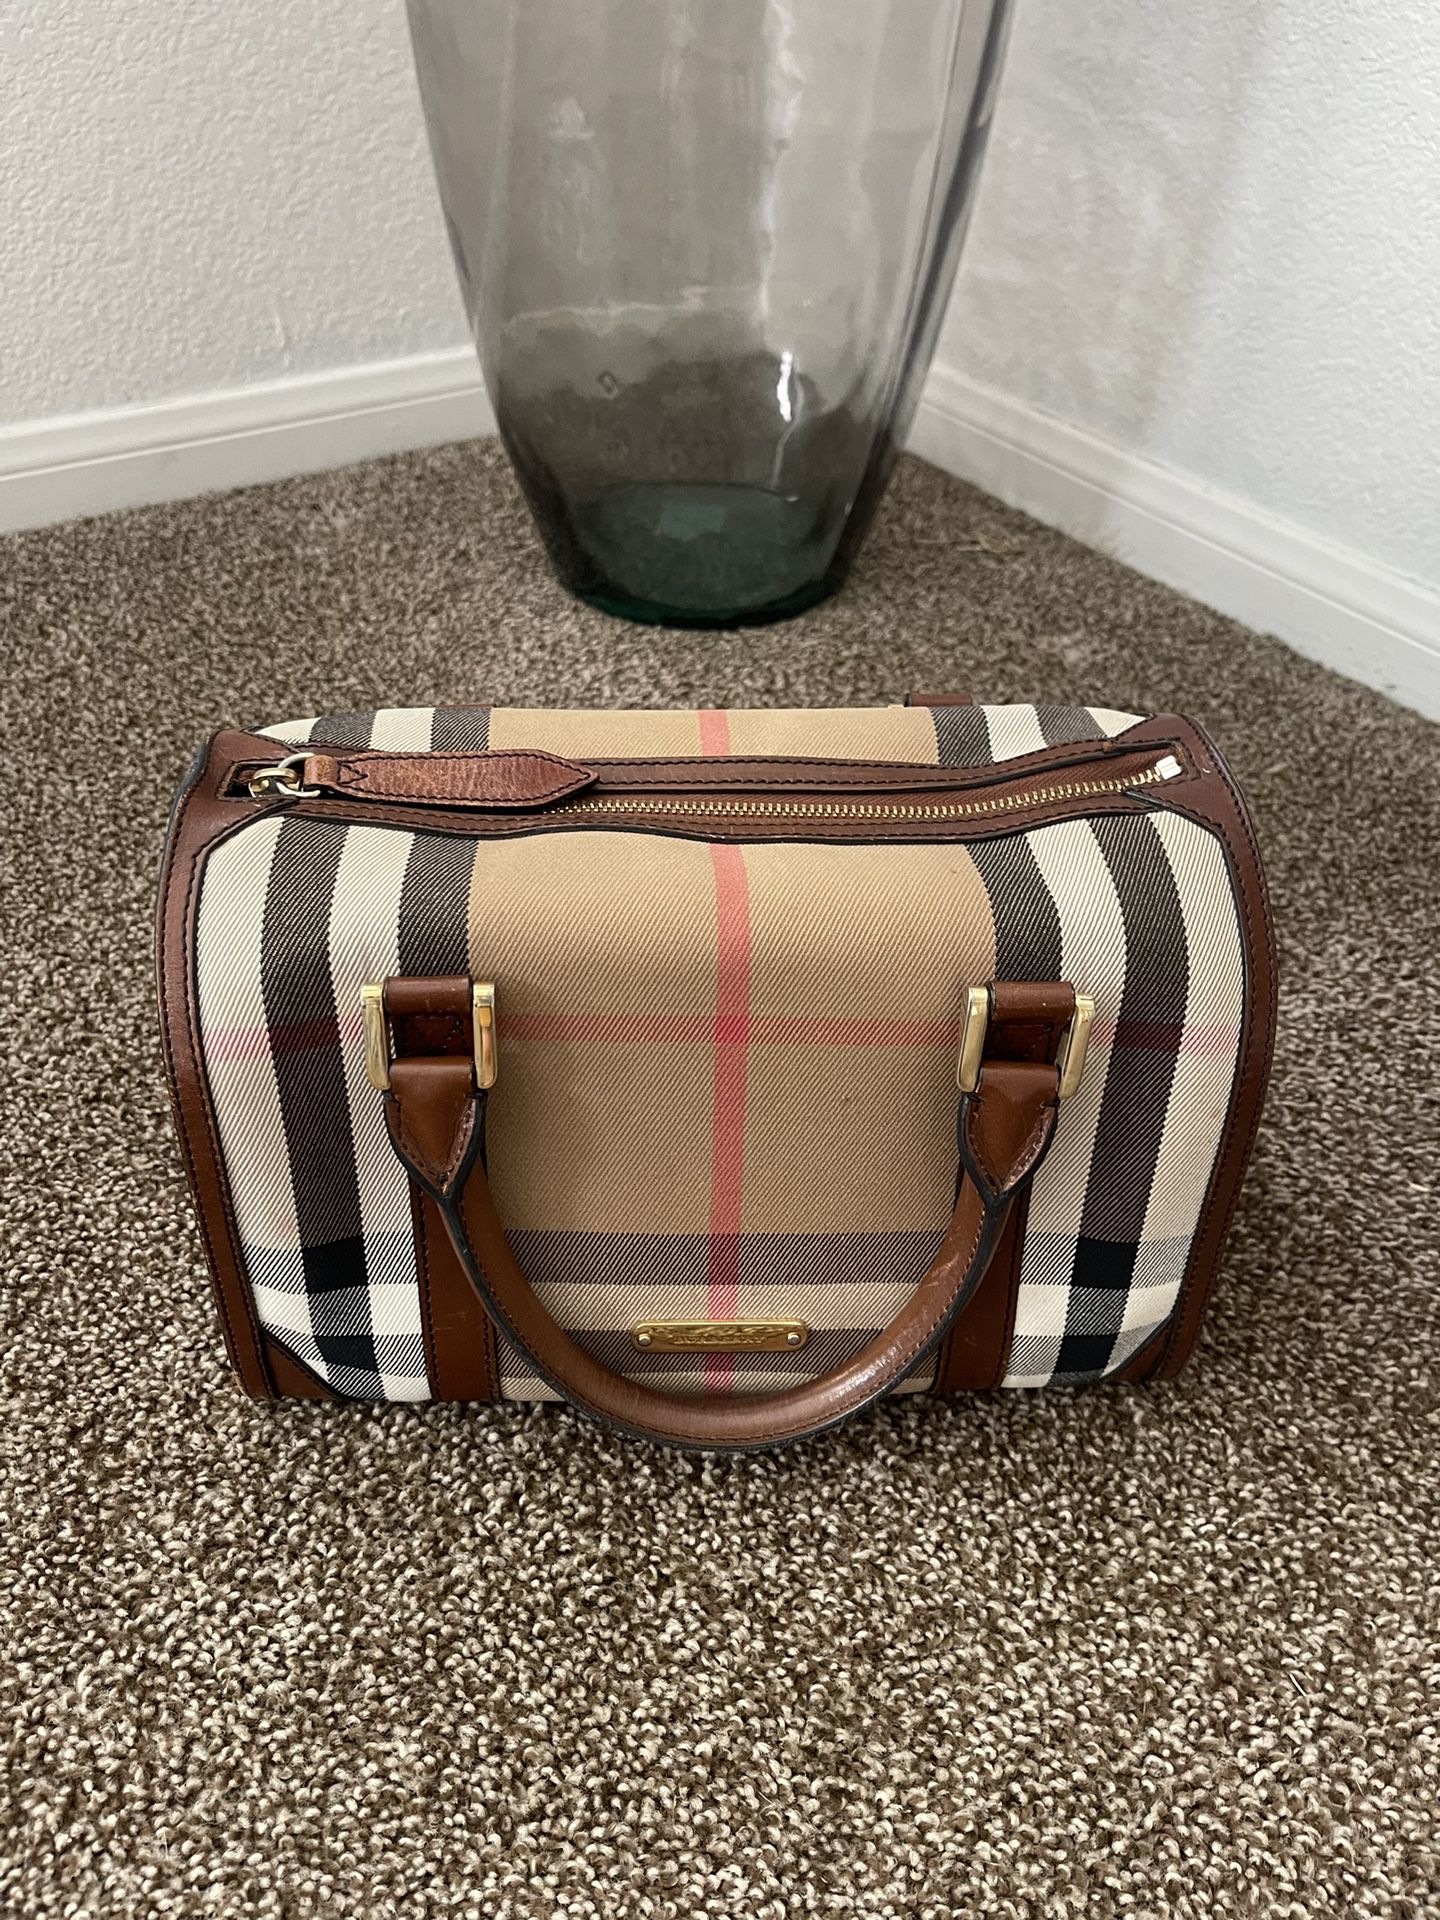 99% New Burberry Bag for Sale in San Mateo, CA - OfferUp